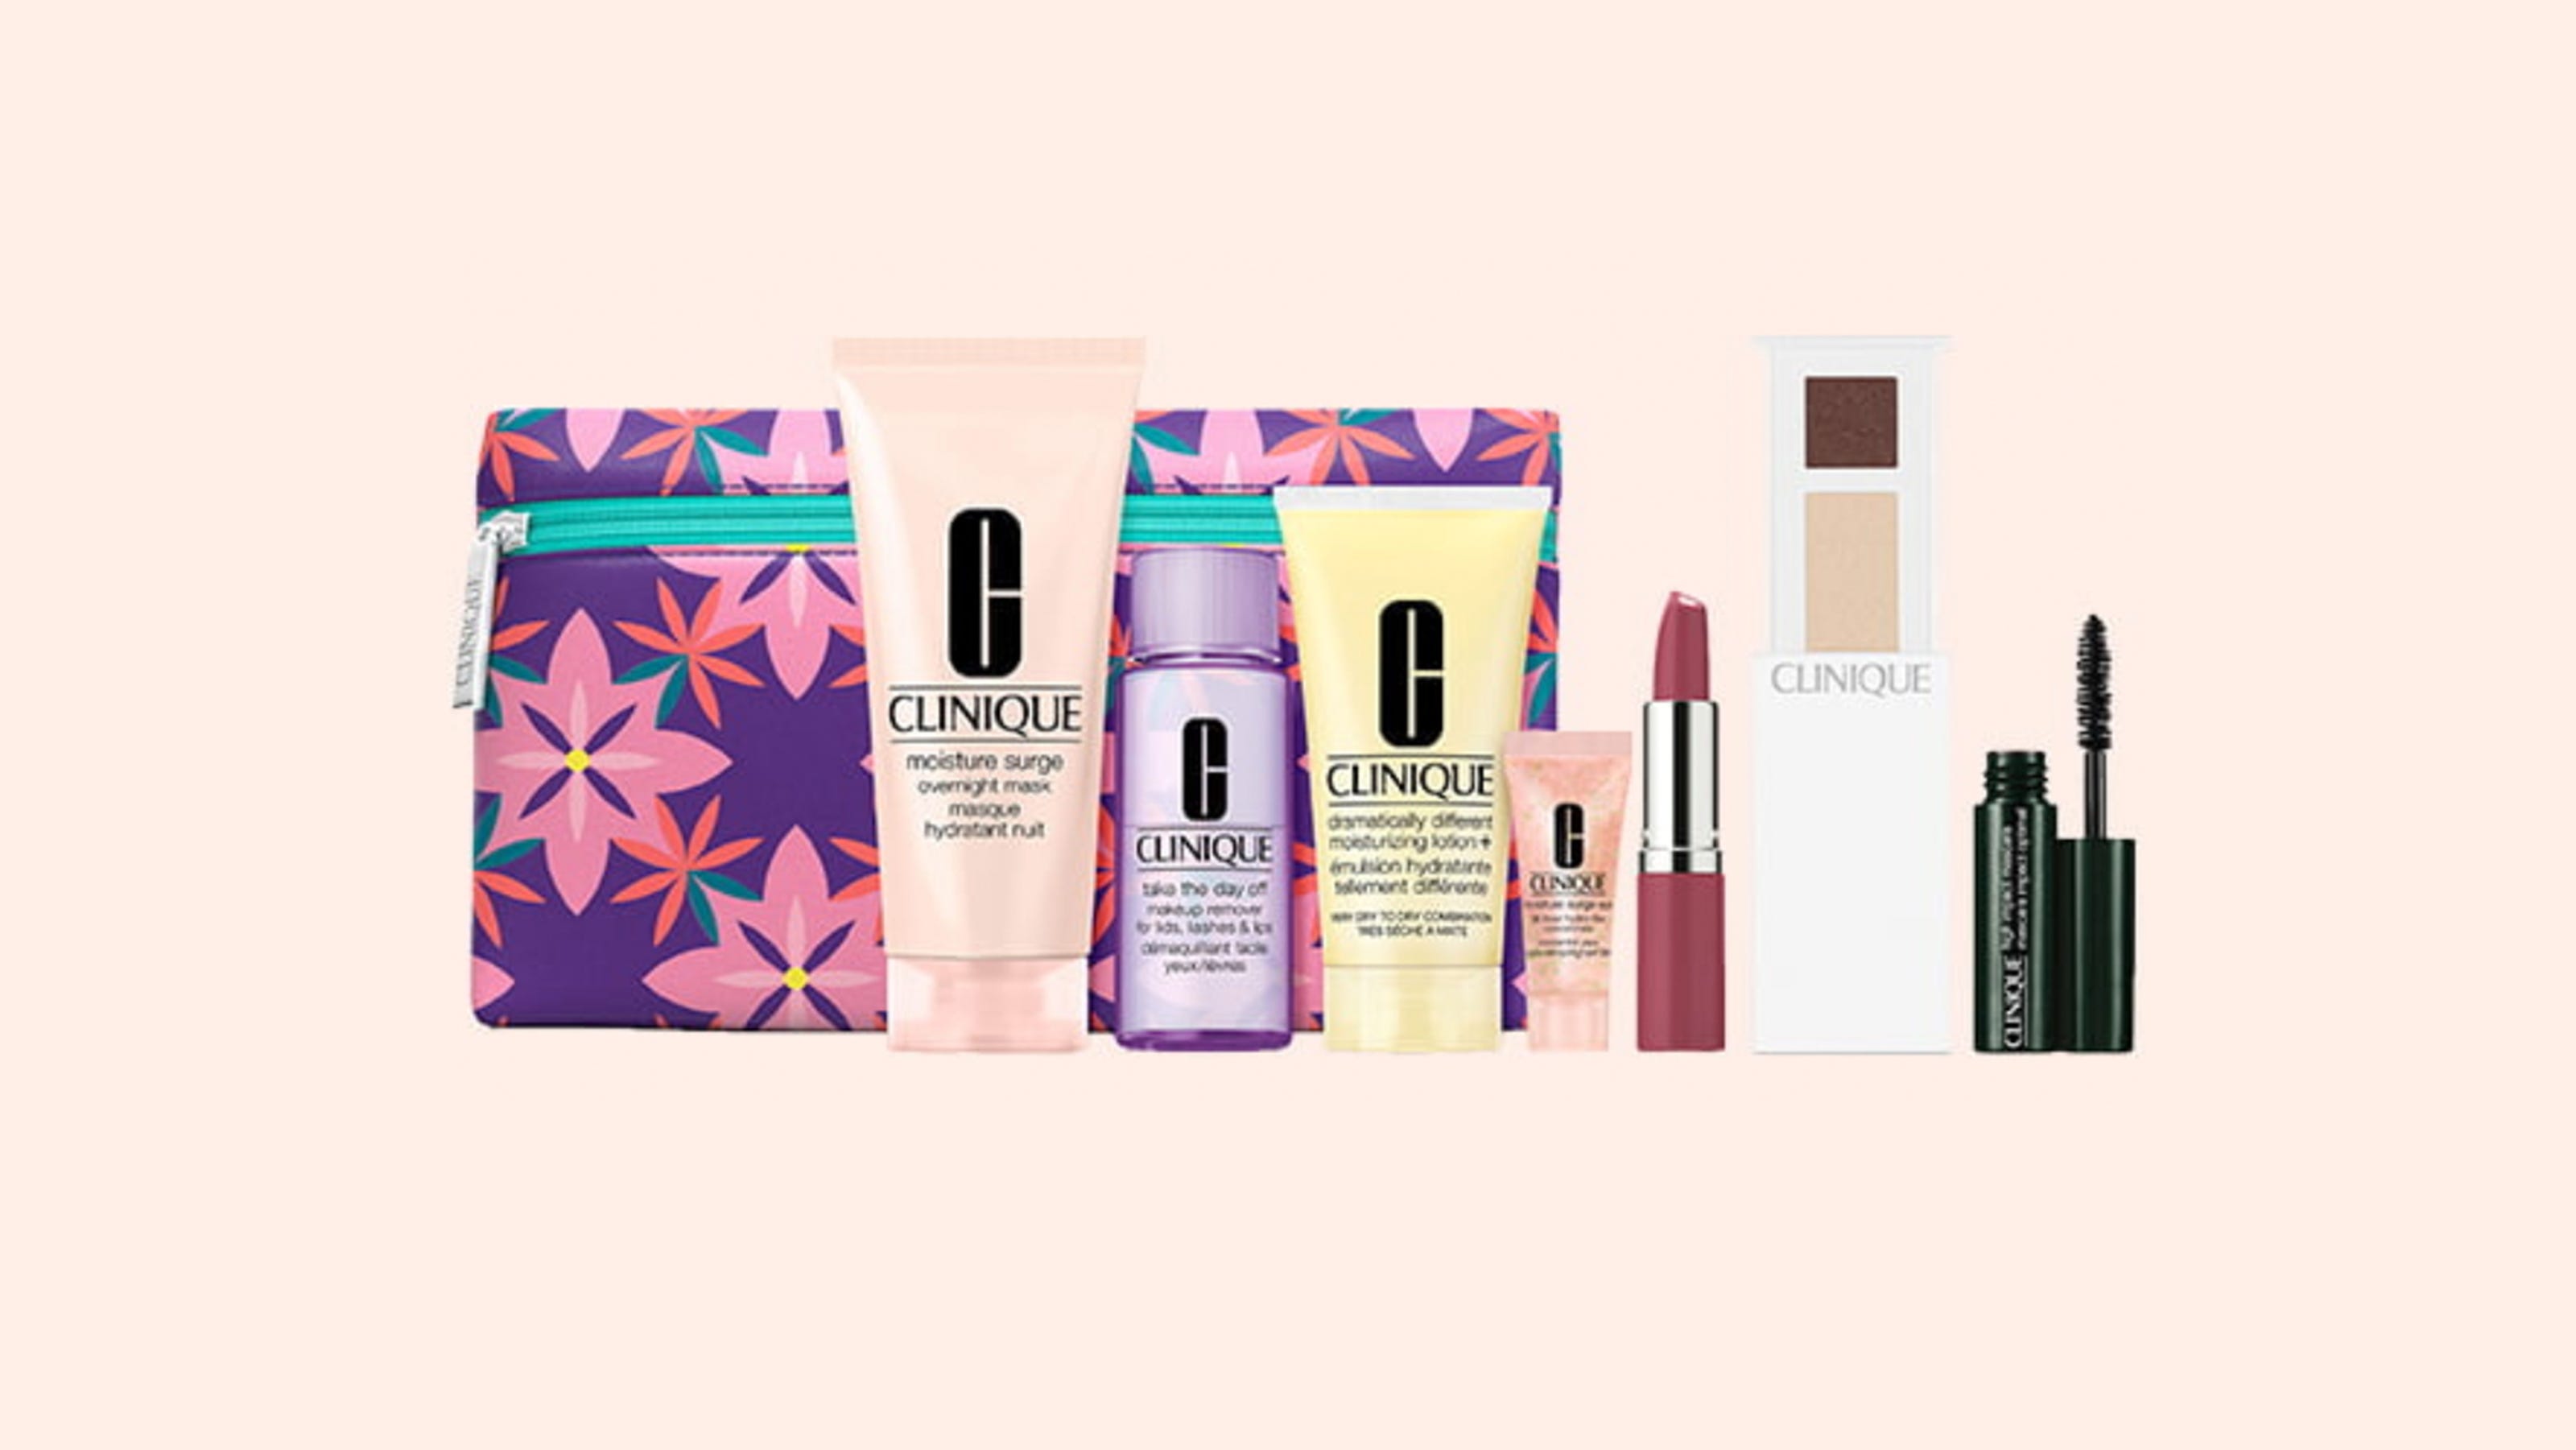 You can get a free 8-piece Clinique gift with purchase right now at Nordstrom